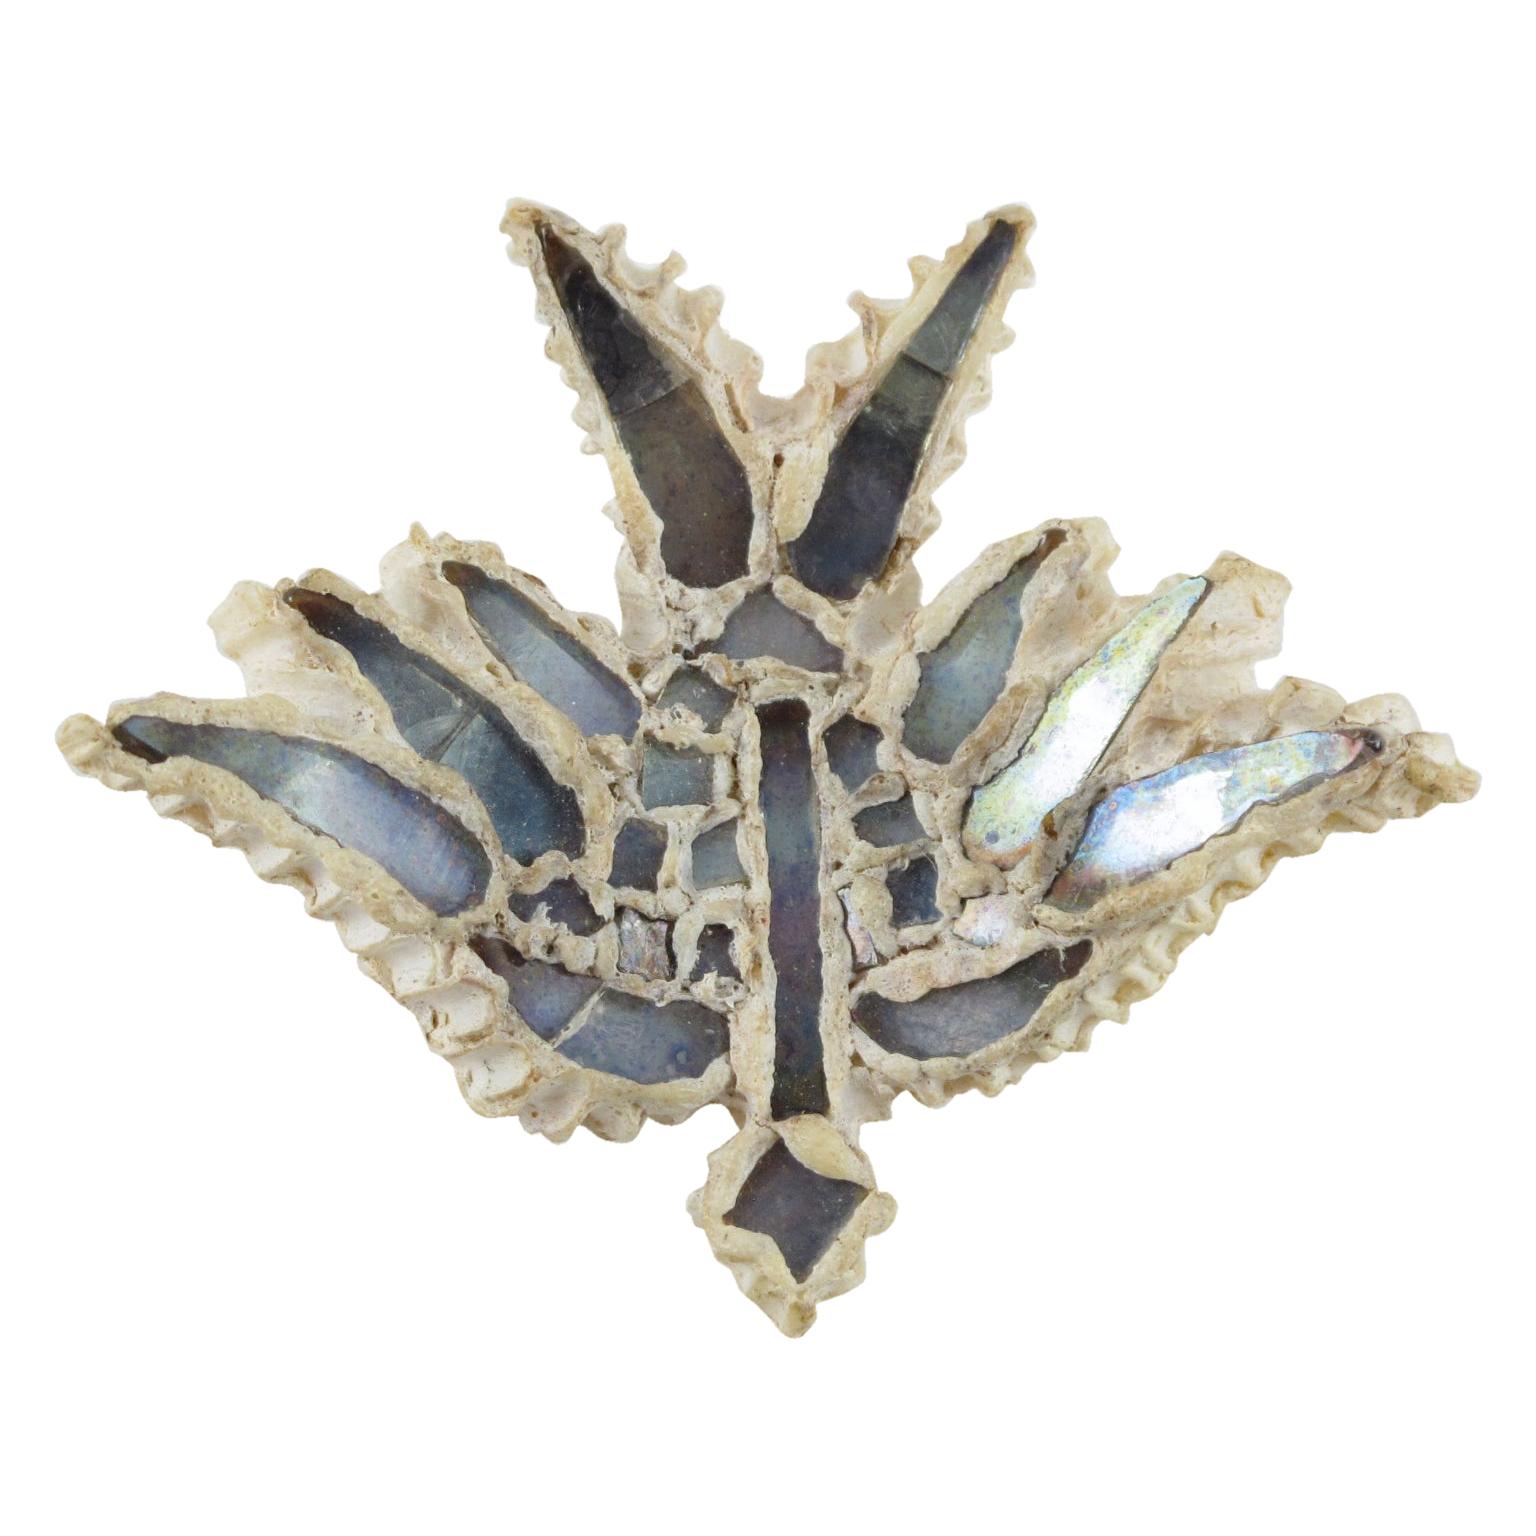 Beautiful Line Vautrin Talosel or resin bird brooch pin. Off-white resin encrusted with blue-colored mirrored glass on a flying bird shape. Glass and Talosel, a technique created by Line Vautrin, in which she used cellulose acetate that was